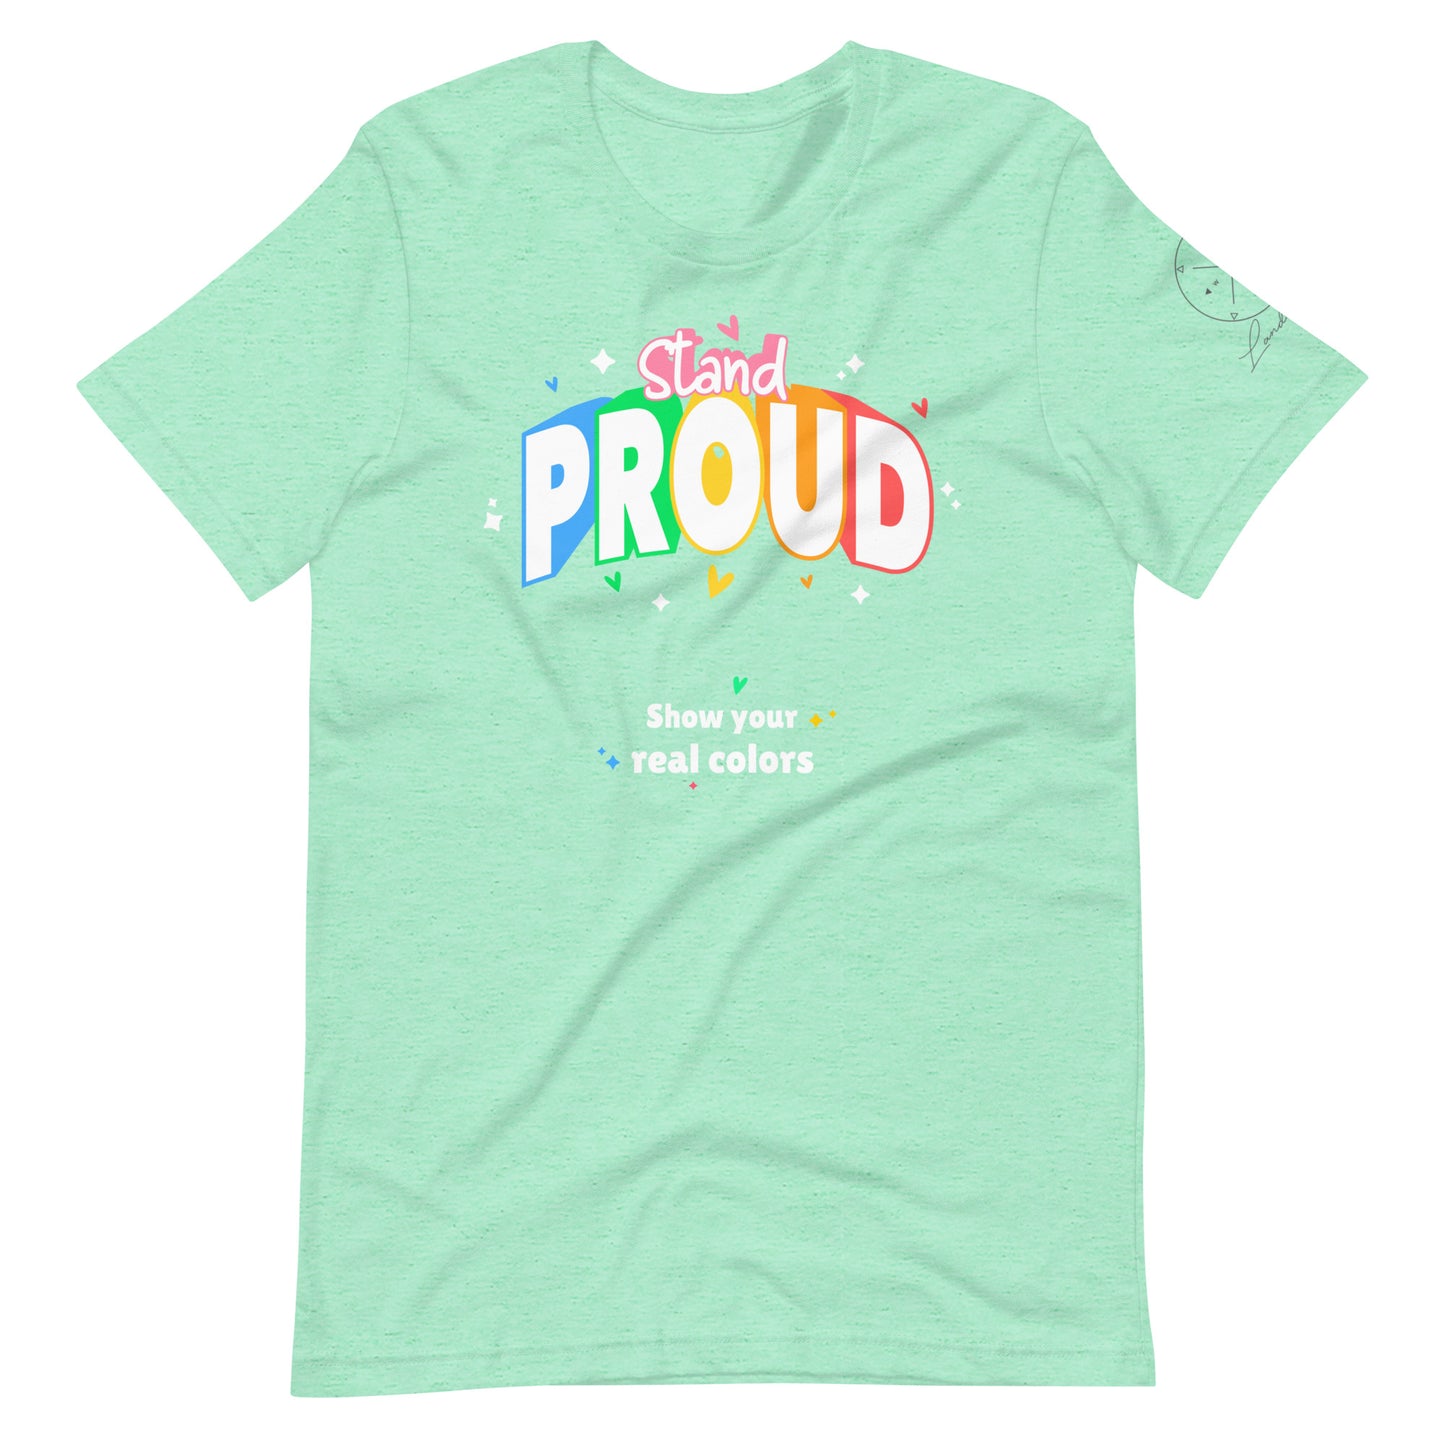 Stand Proud! "Show Your True Colors" Pride Tee